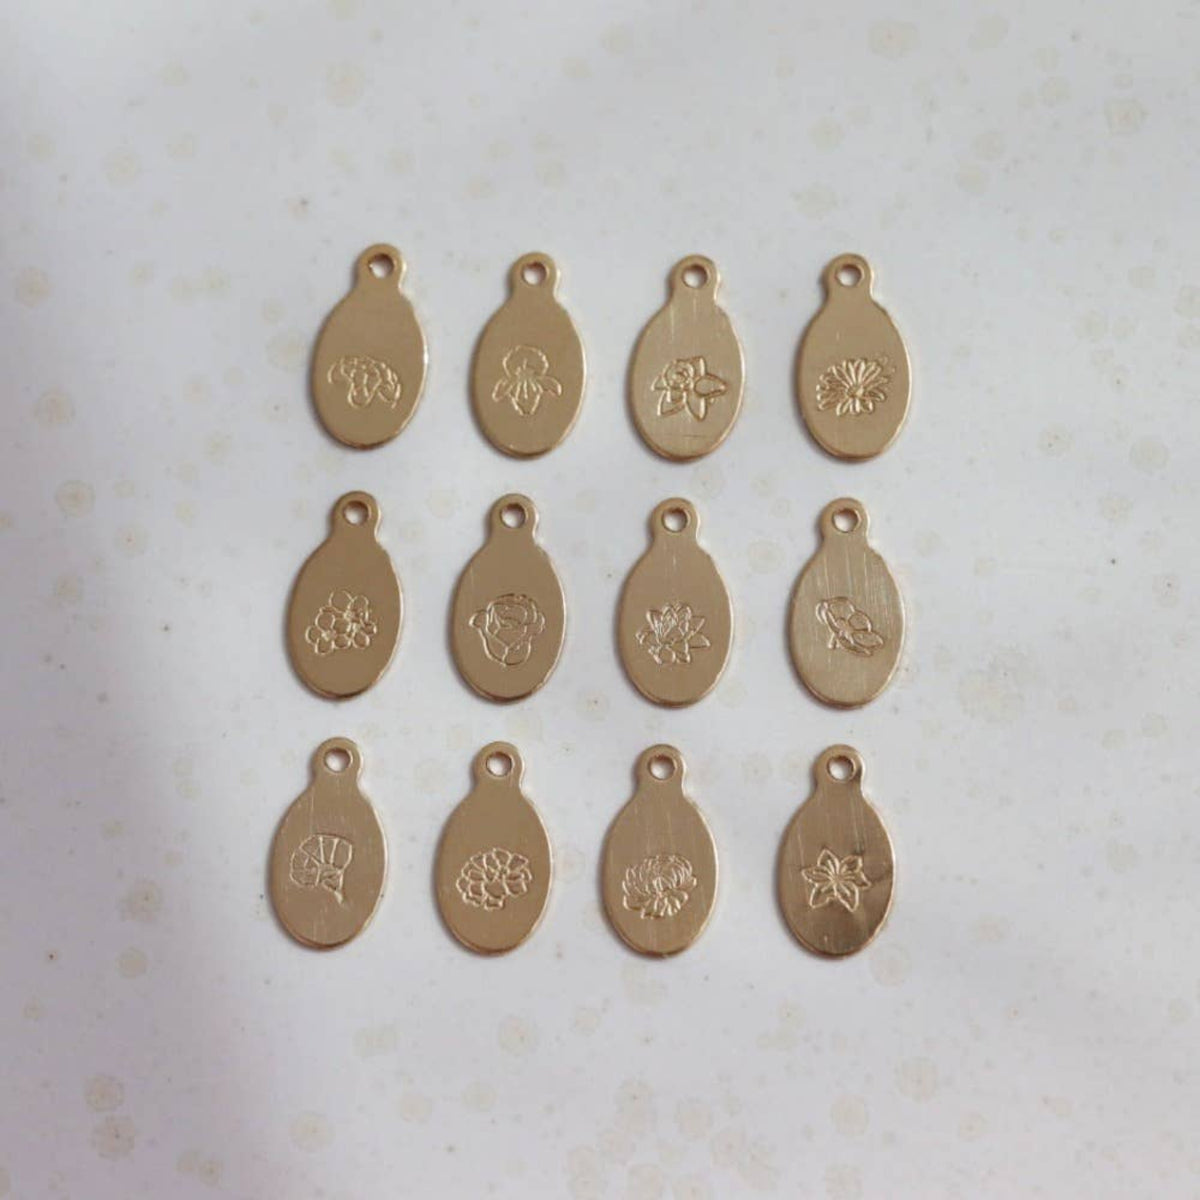 Golden necklace pendents with birth flowers for all months. 